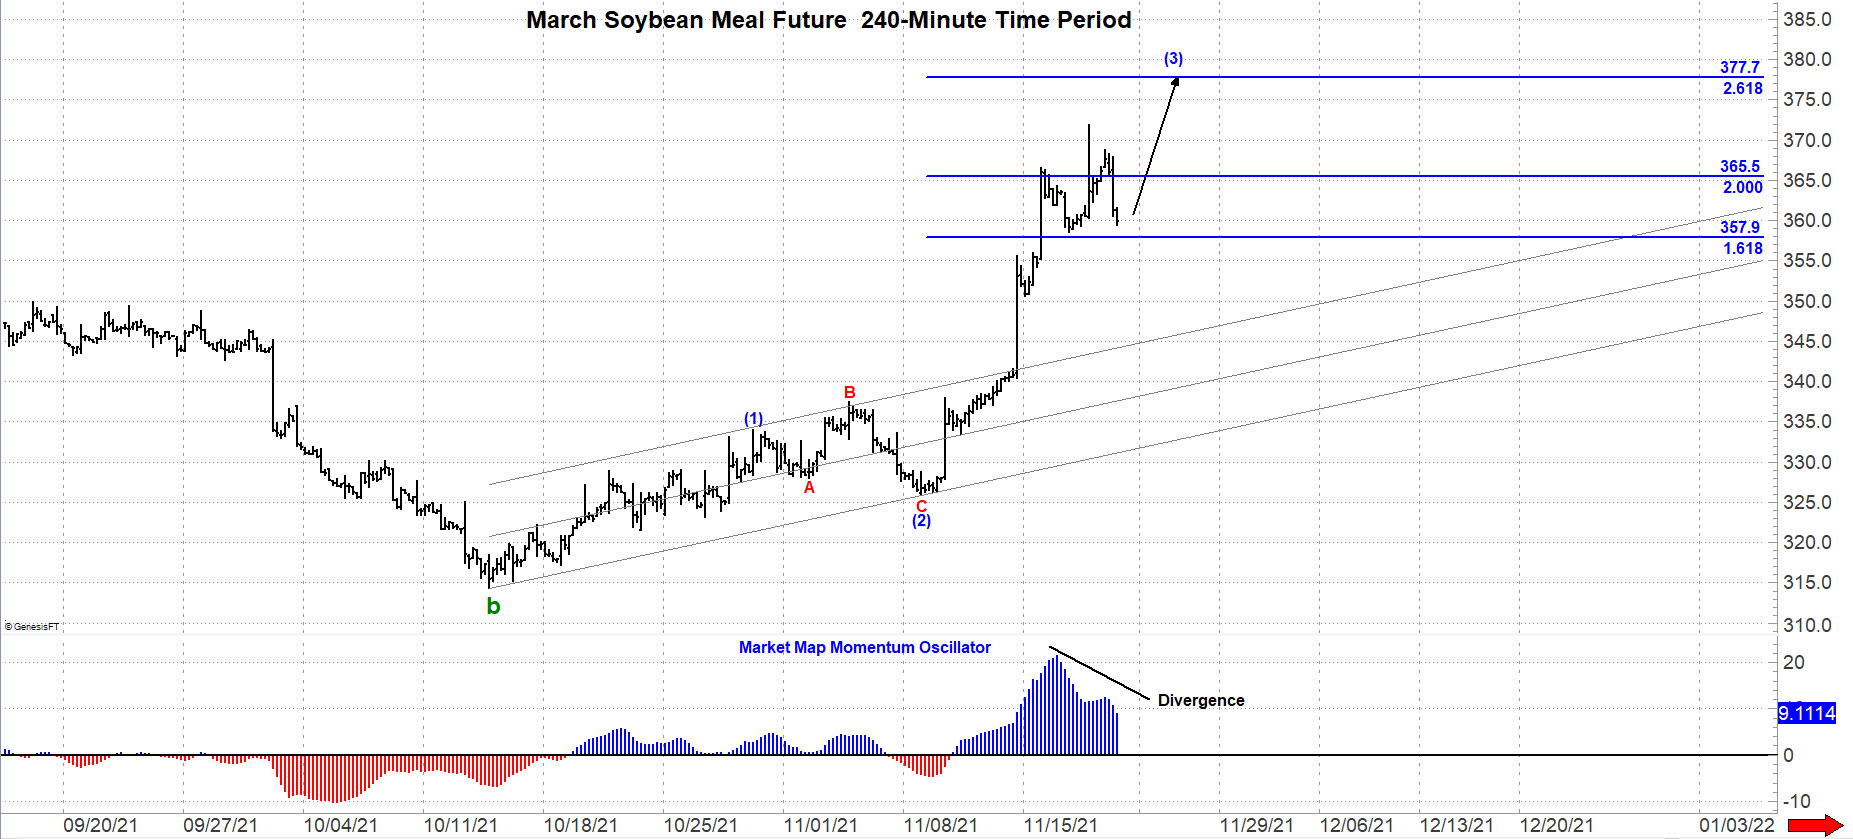 Soybean Meal Futures